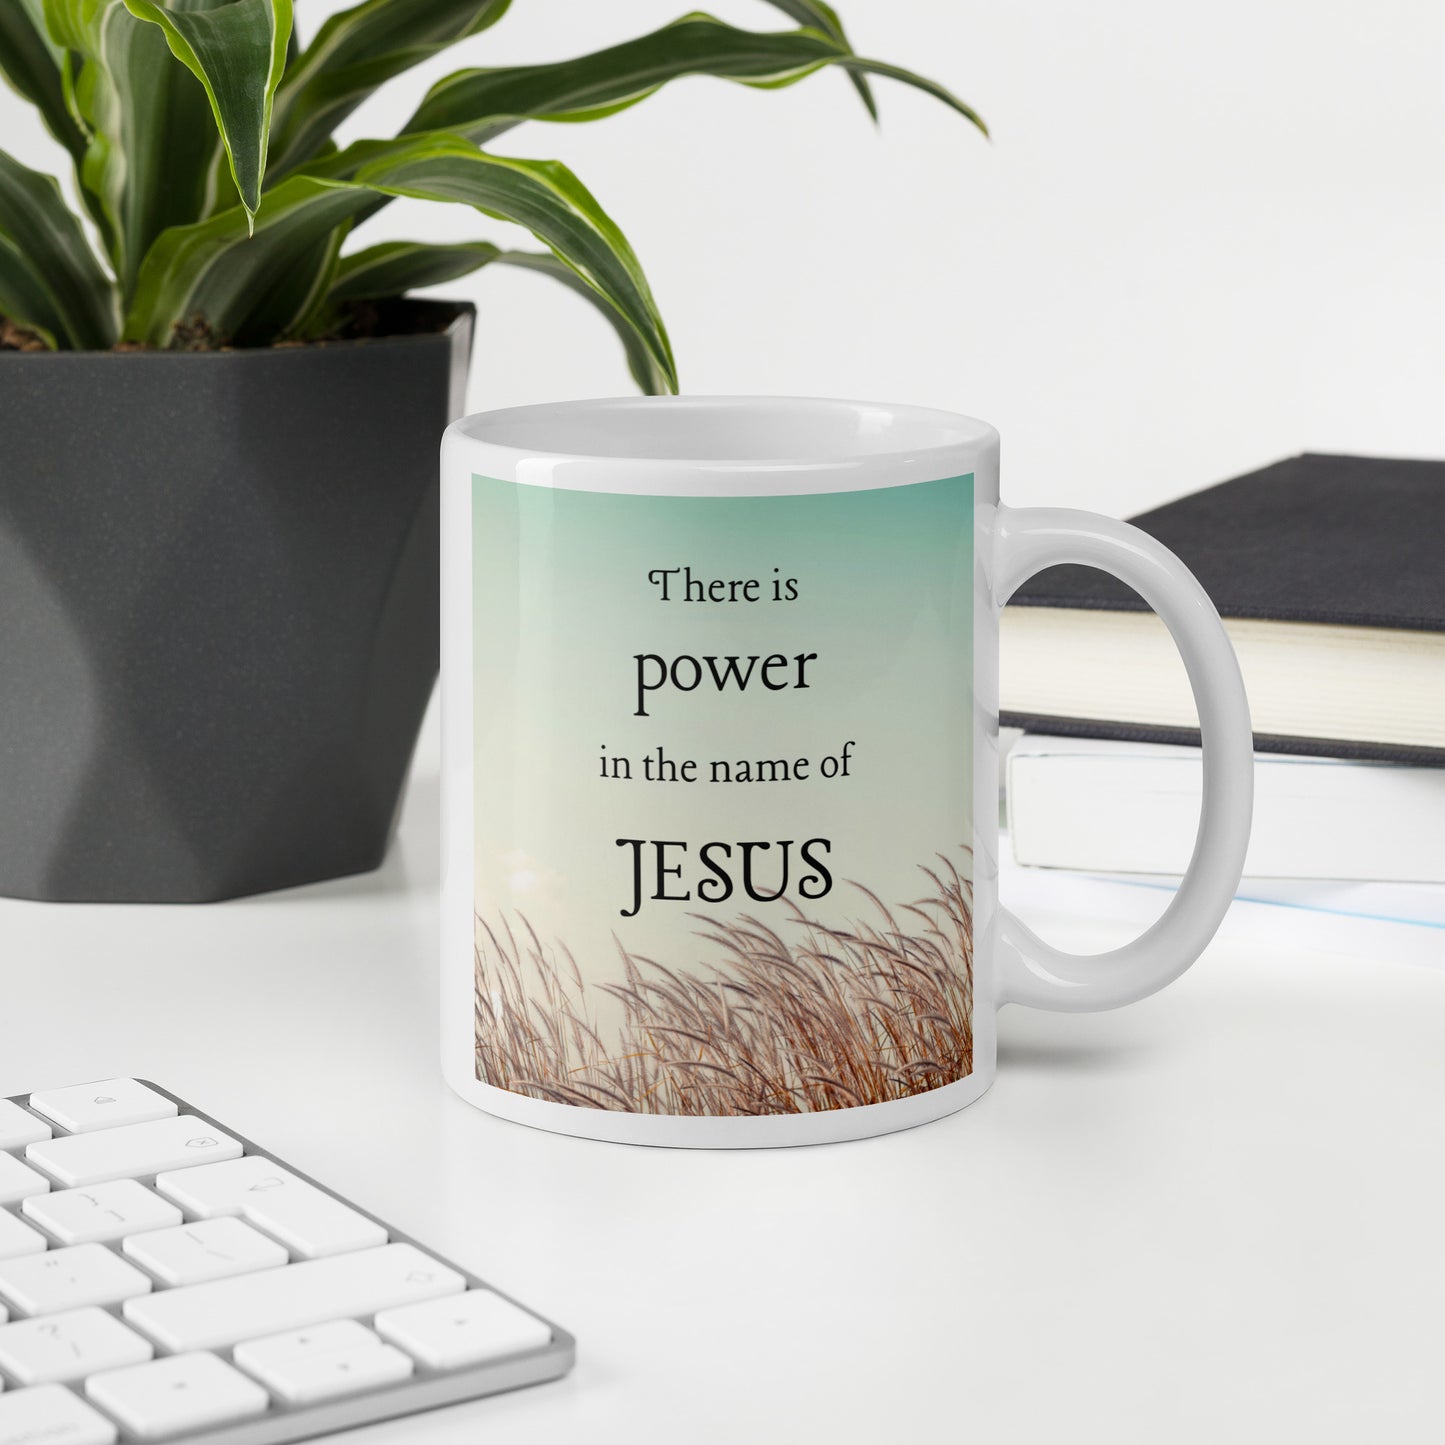 There is power in the name of Jesus White glossy mug